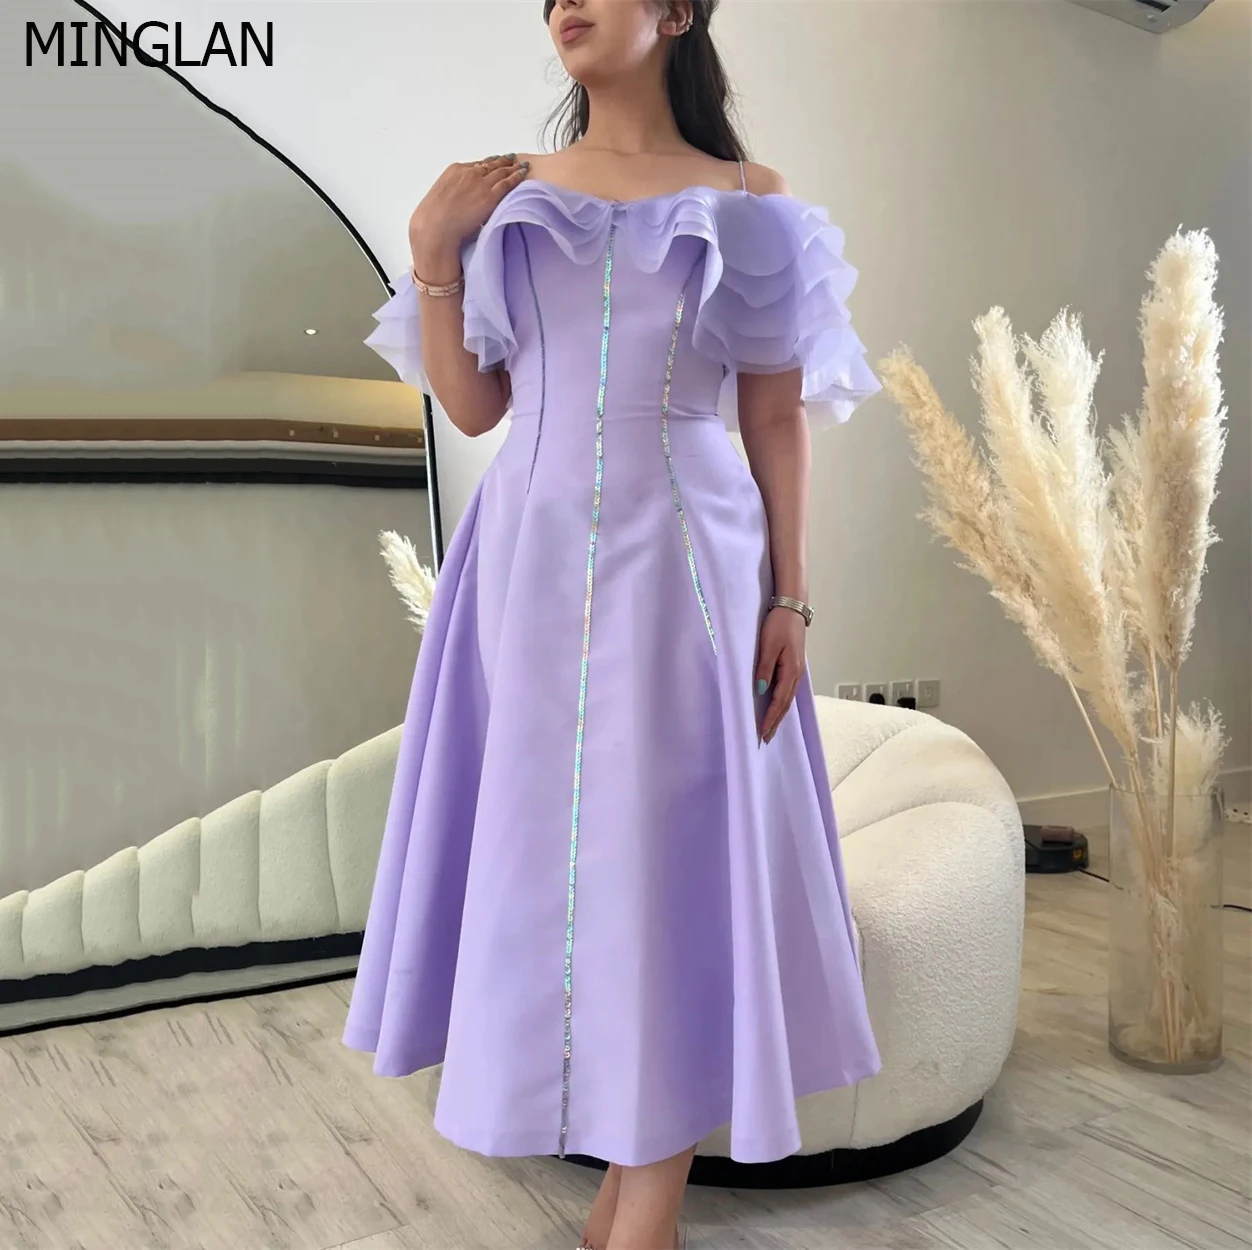 

MINGLAN Fashion Strapless Pleat Sequined Short Sleeve Prom Dress Elegant Ankle Length Formal Elegant Gown For Woman New 2023